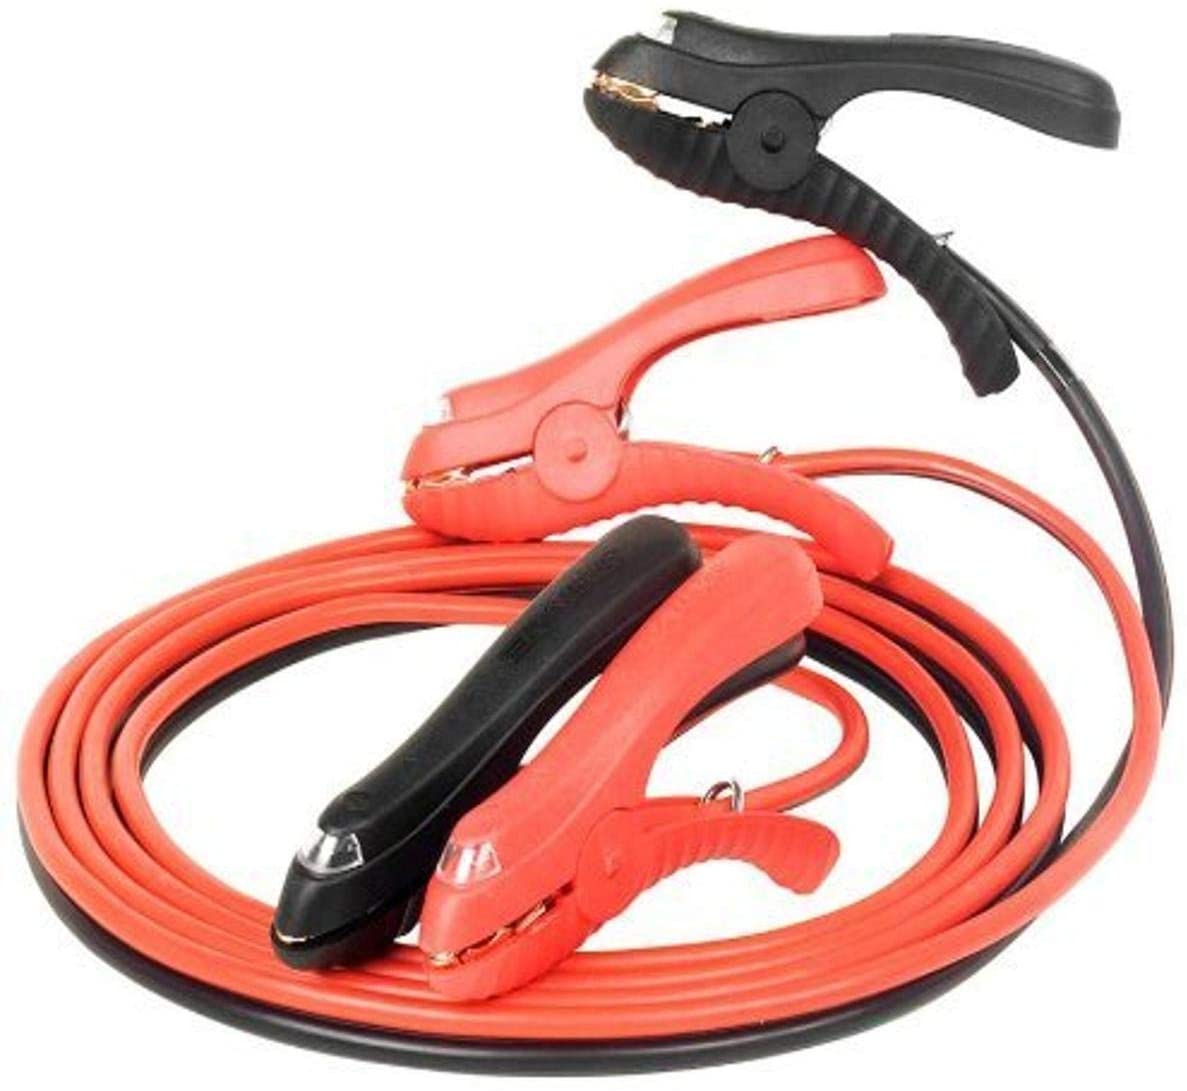 Rally Marine Grade 10 Gauge Jumper Cables with LED Light (7339)